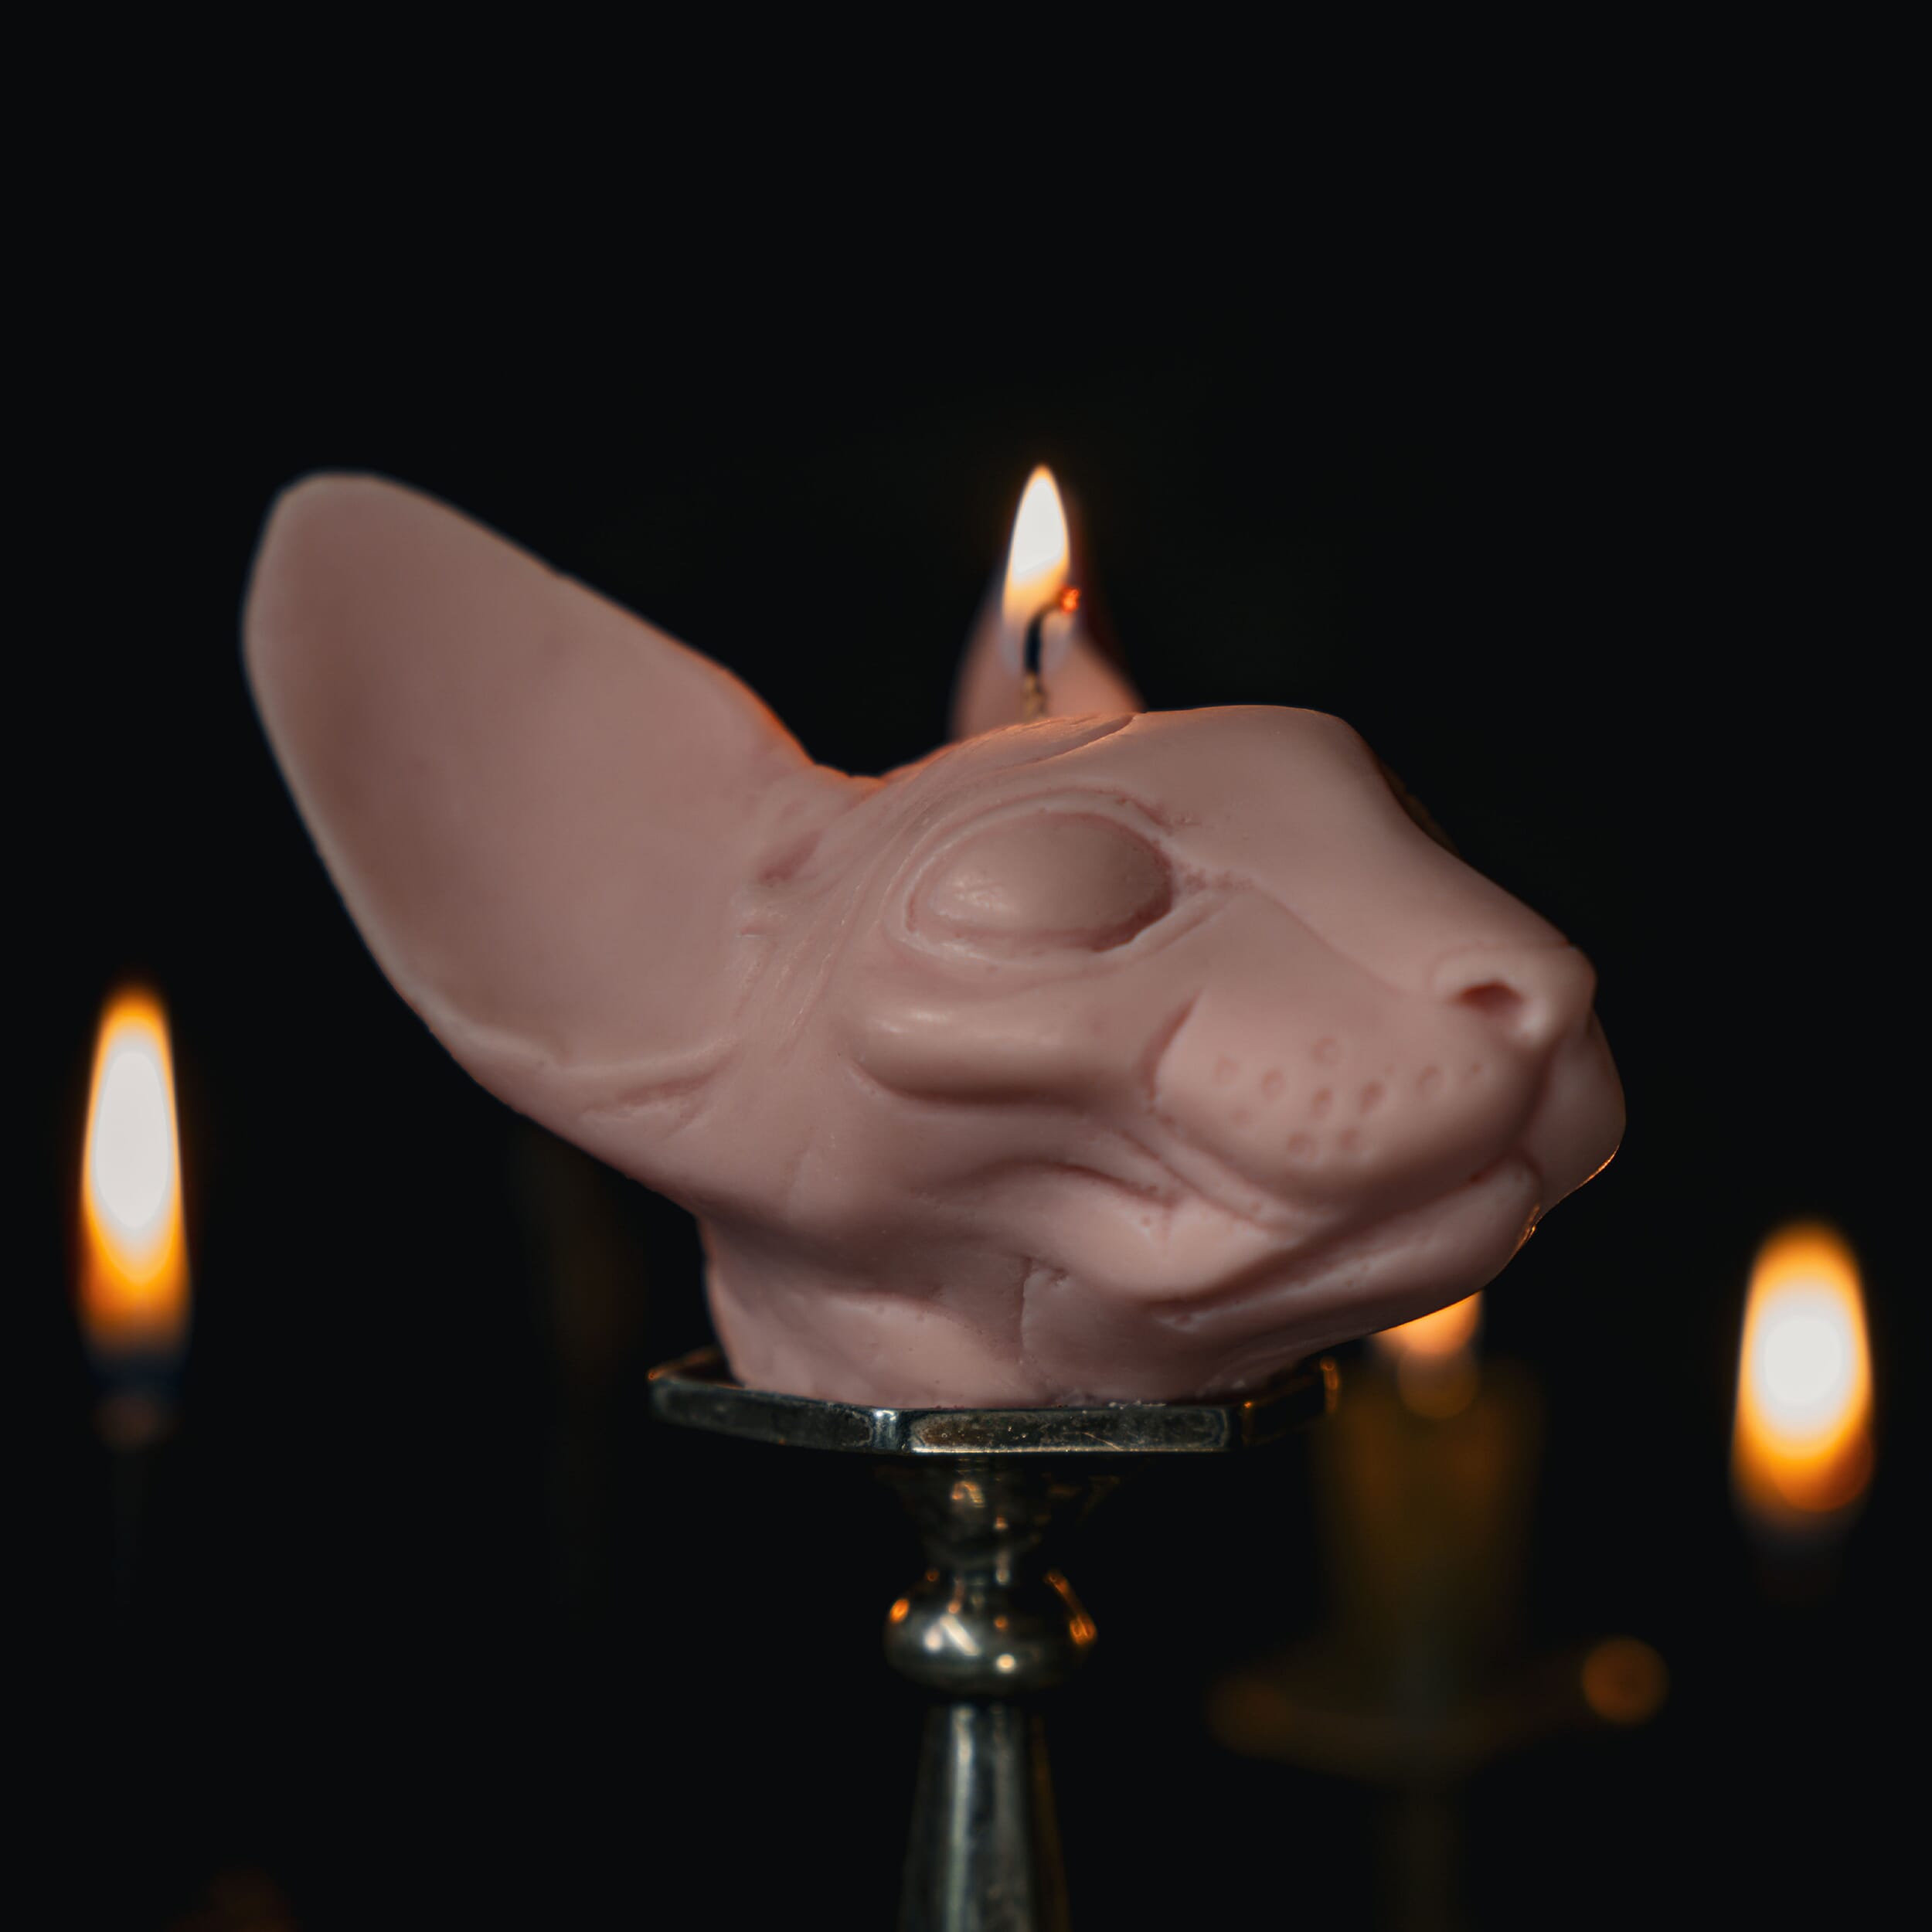 Sphynx Cat candle - The Blackened Teeth - Gothic home decor